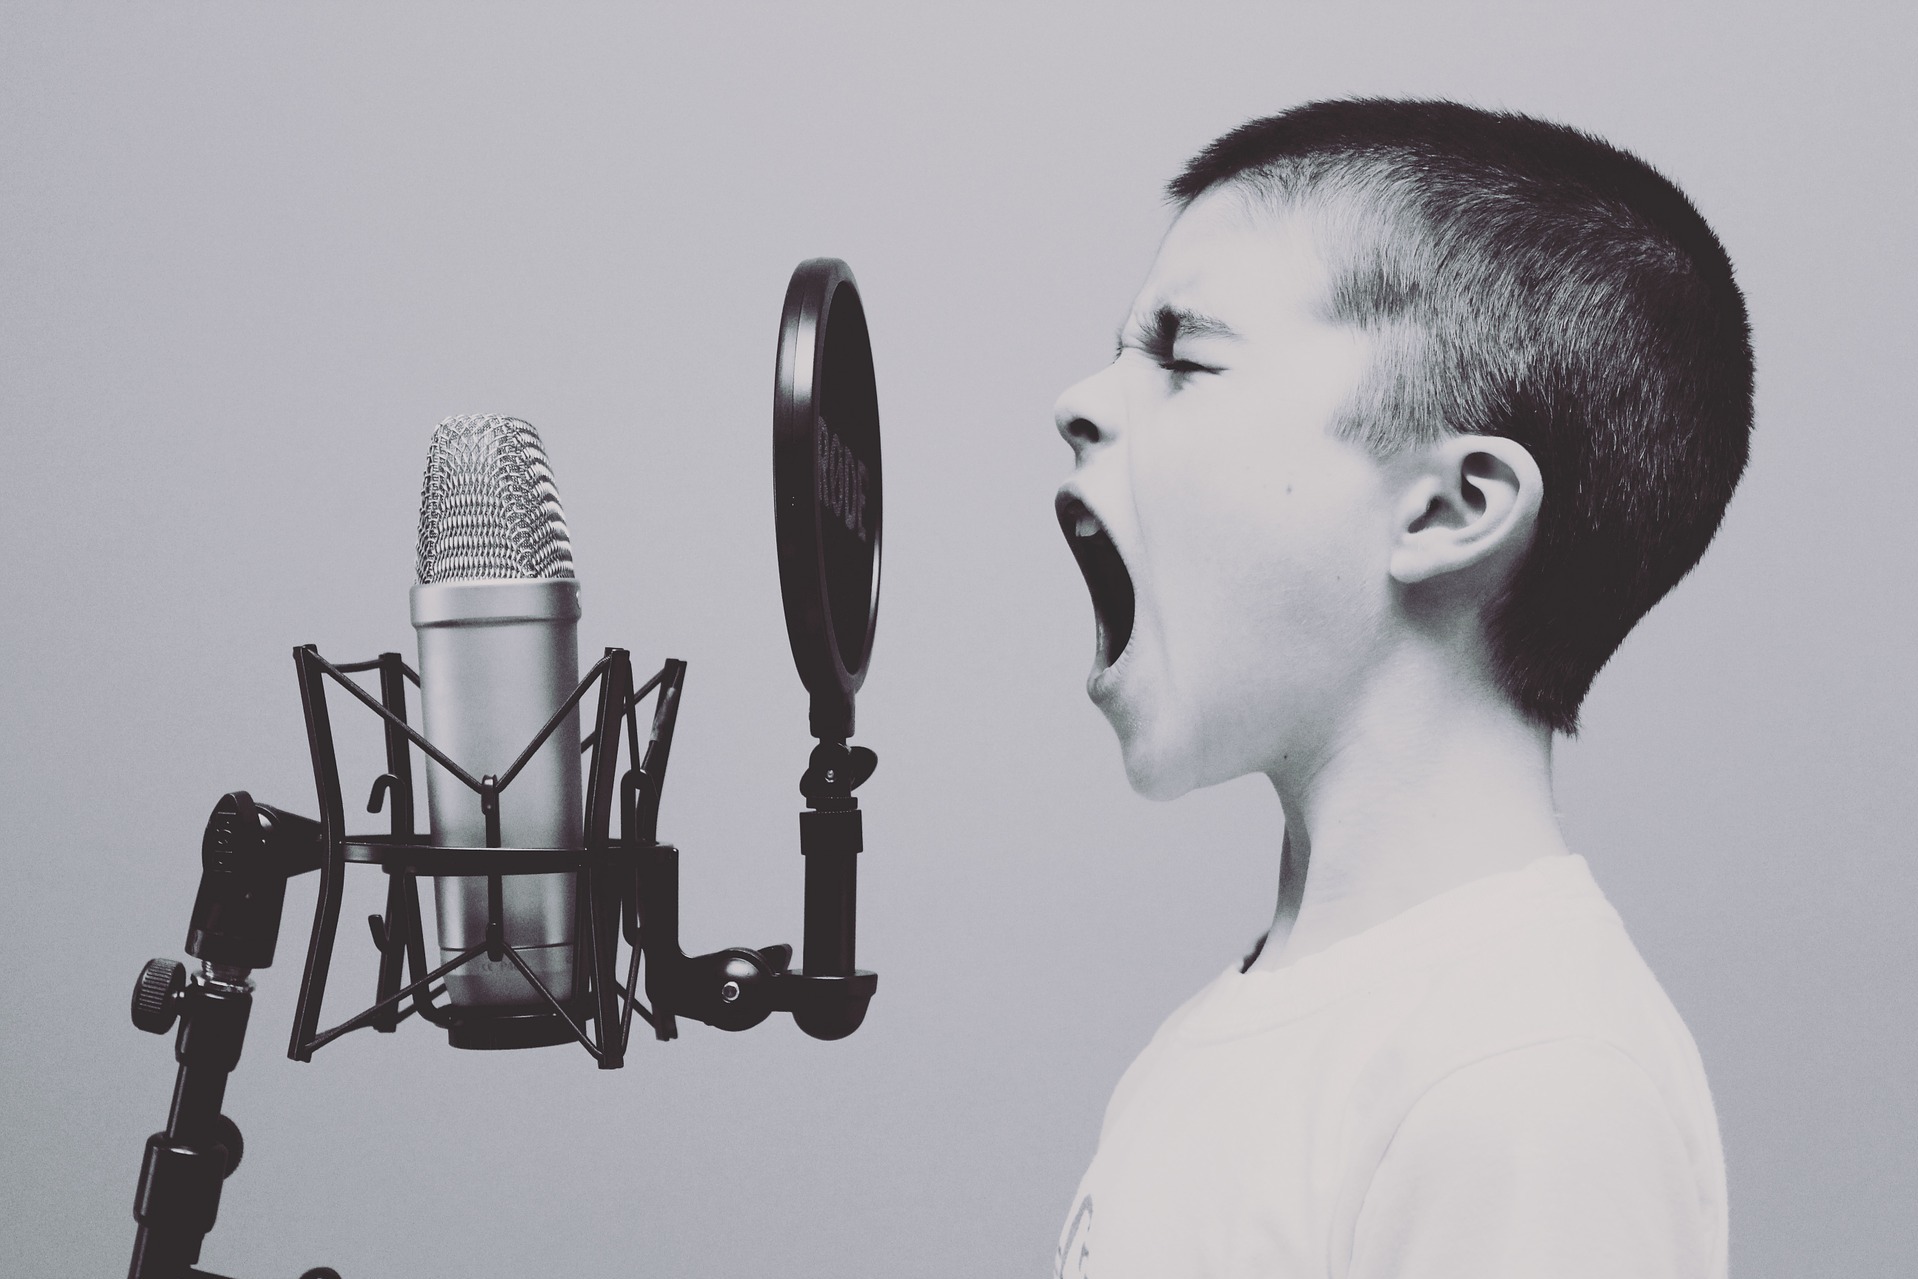 Boy speaking into microphone